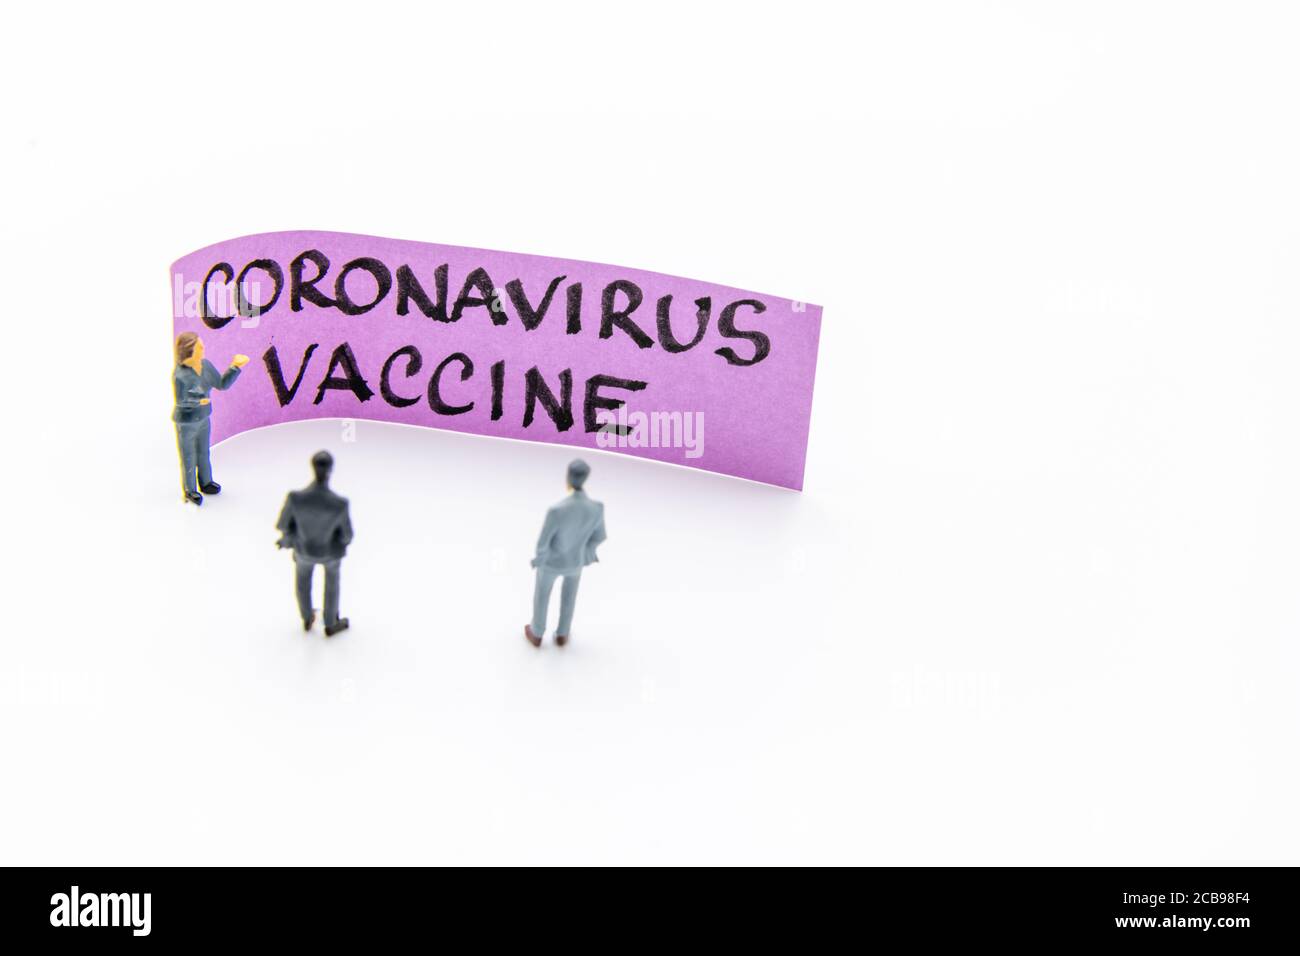 Presentation meeting with miniature figurines posed as business people standing in front of post-it note with Coronavirus Vaccine handwritten message Stock Photo